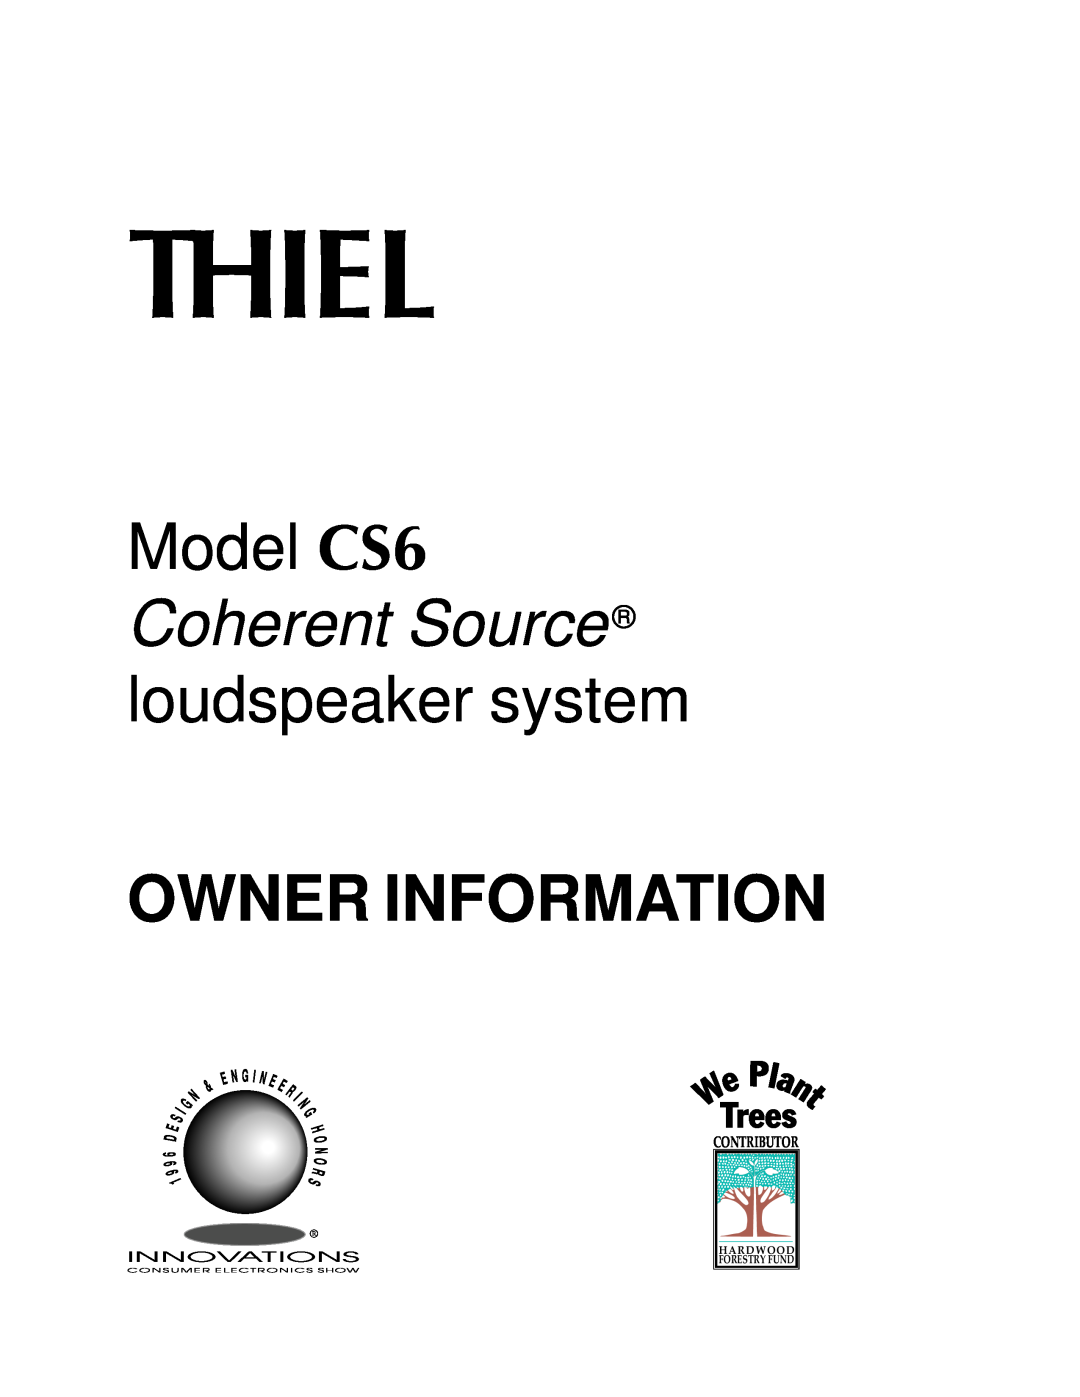 Thiel Audio Products manual Thiel, Model CS6 Coherent Source loudspeaker system, Owner Information, Innovations 